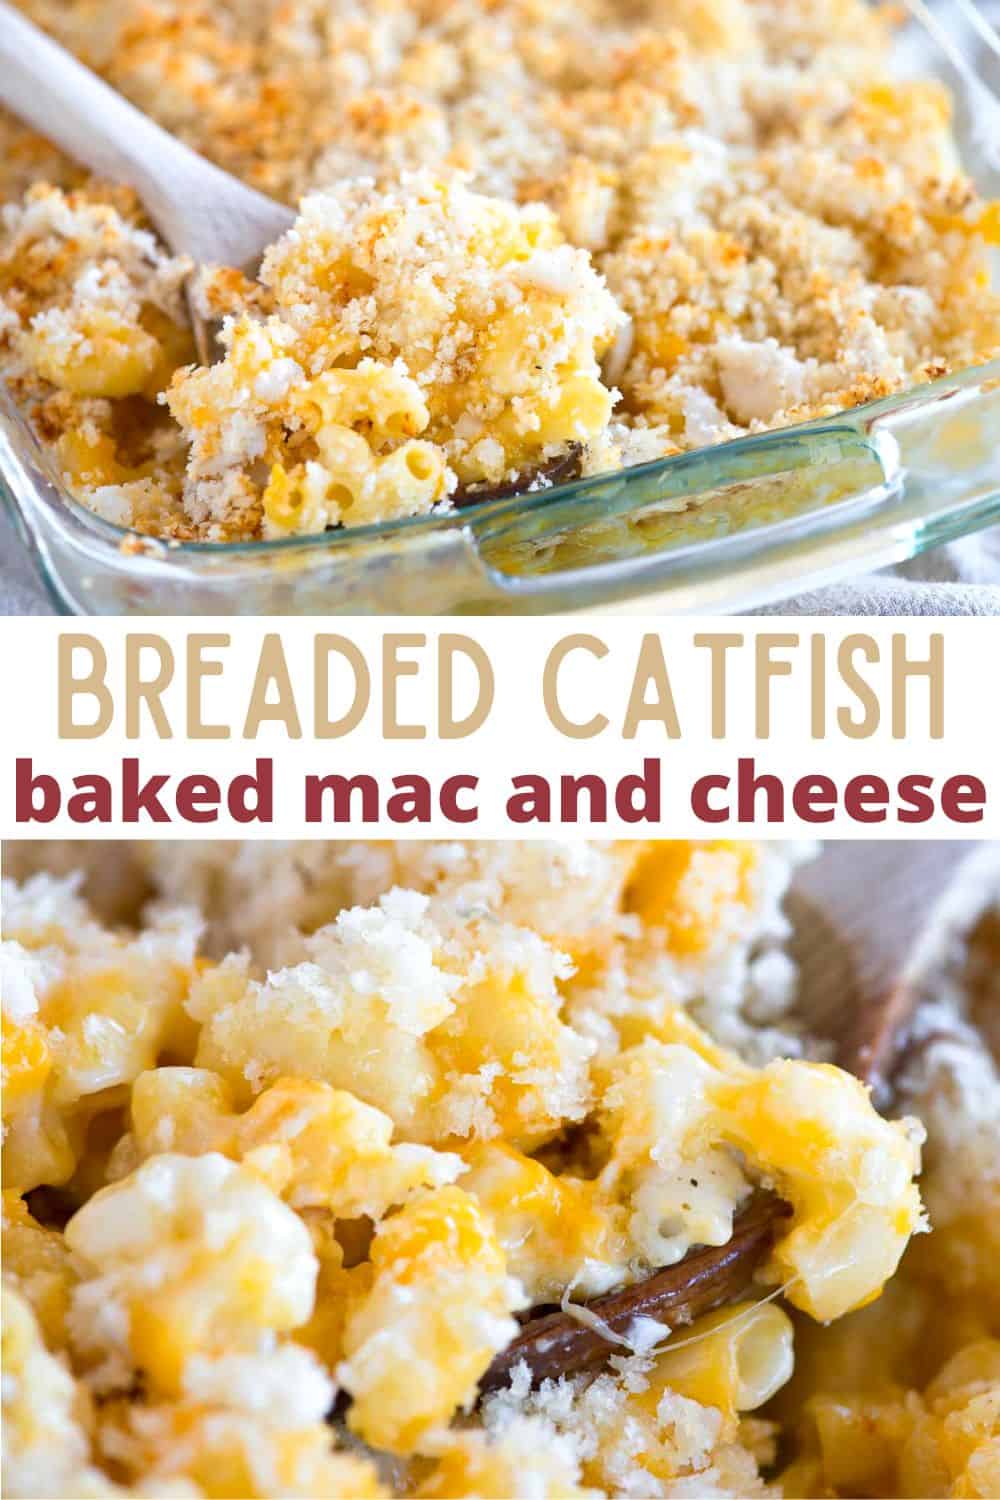 We took our favorite oven baked macaroni and cheese to another level by adding a crispy catfish breadcrumb topping! This catfish recipe is an easy weeknight dinner the whole family will enjoy.